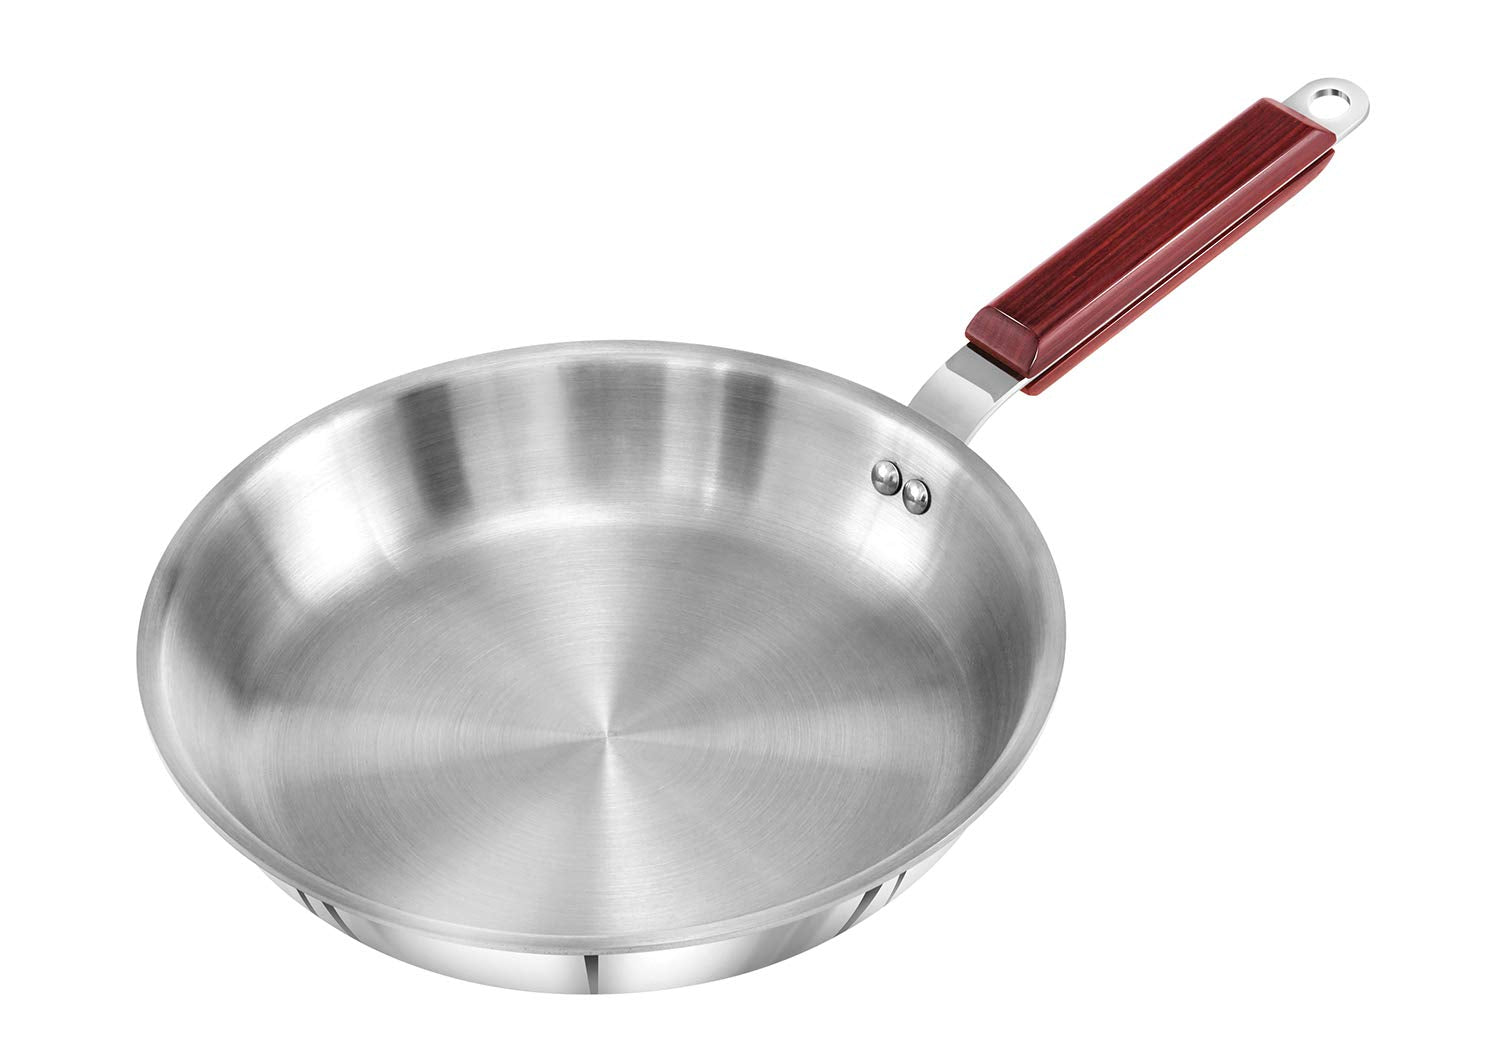 Hawkins Tri-Ply Stainless Steel Induction Compatible Frying Pan, Diameter 26 cm, Thickness 3 mm